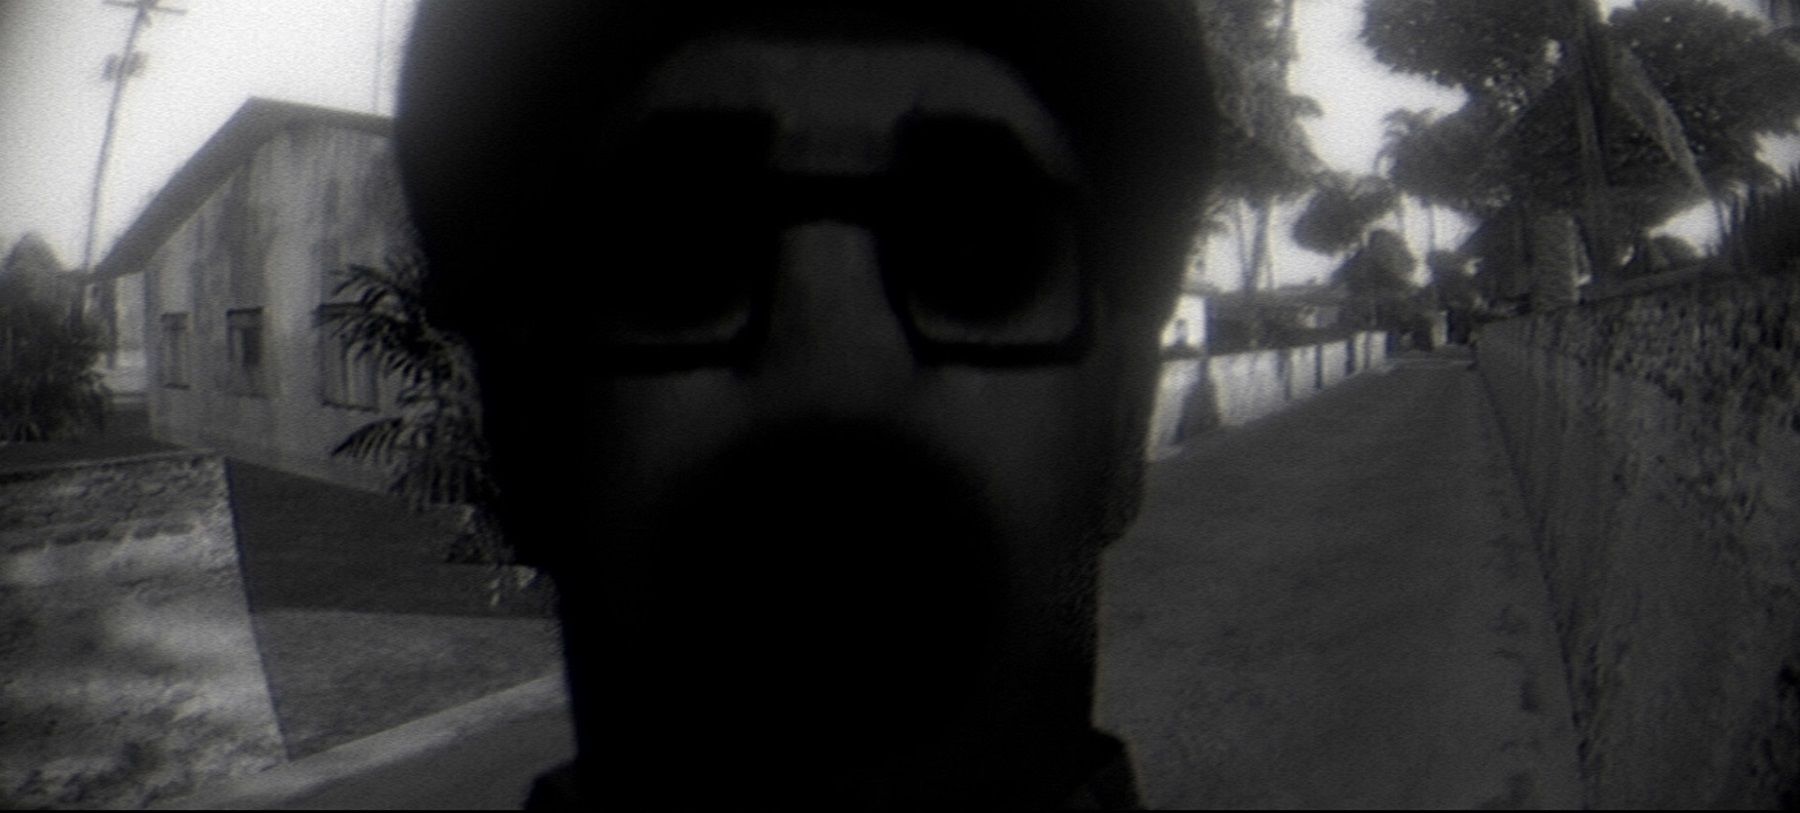 Image from San Andreas fan game showing a creepy black and white close-up of Big Smoke.